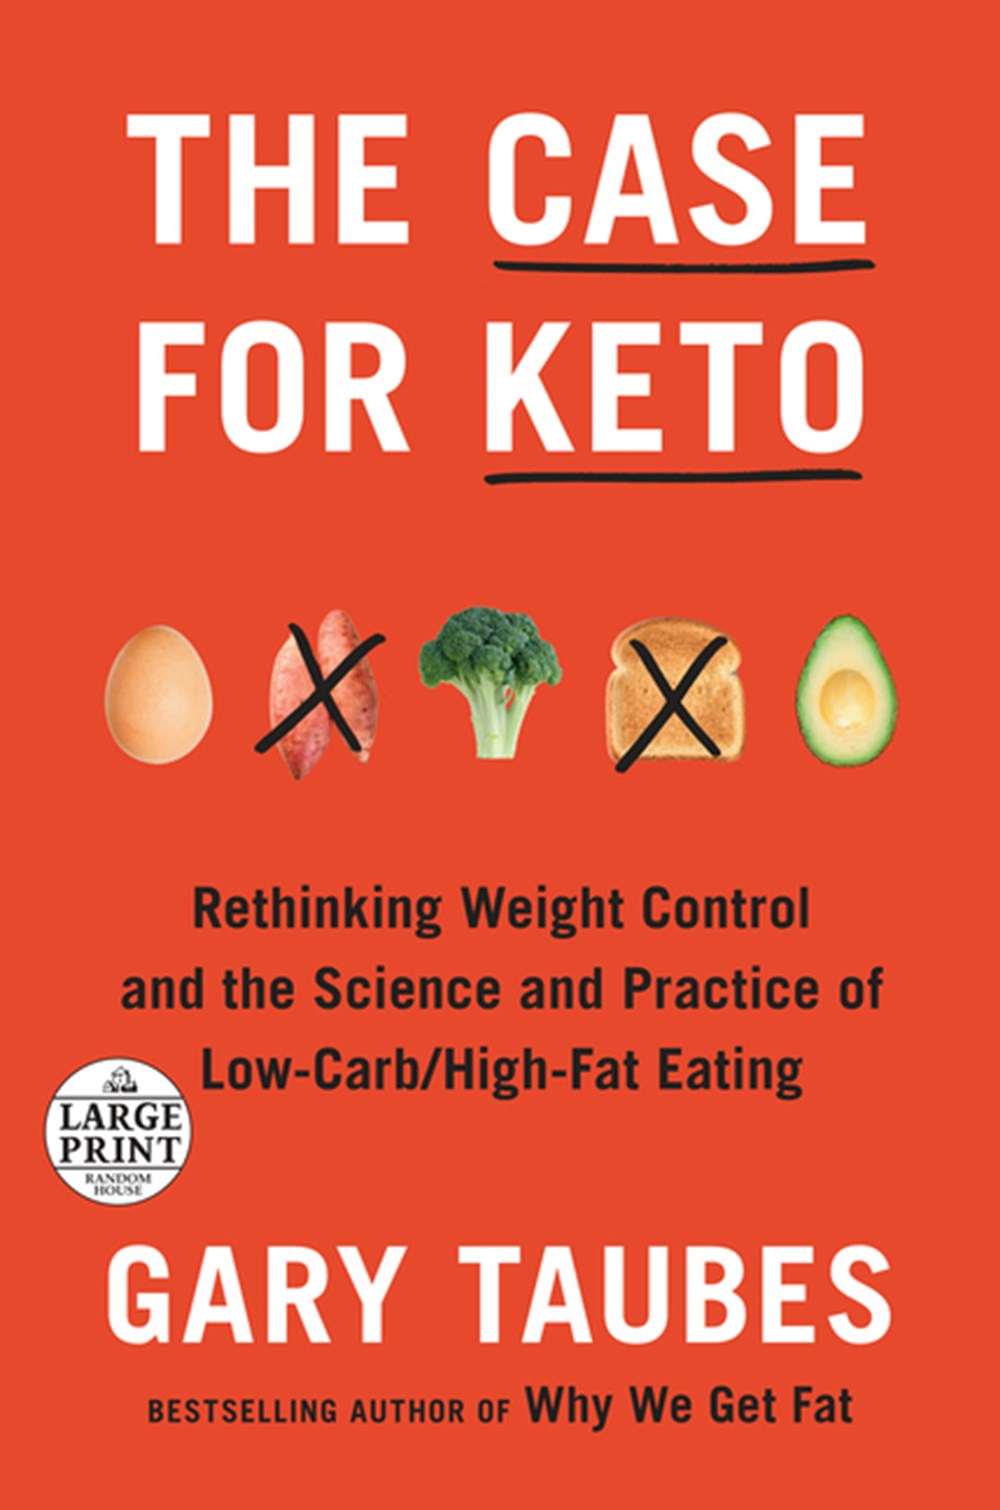 Case for Keto: Rethinking Weight Control and the Science and Practice of Low-Carb/High-Fat Eating